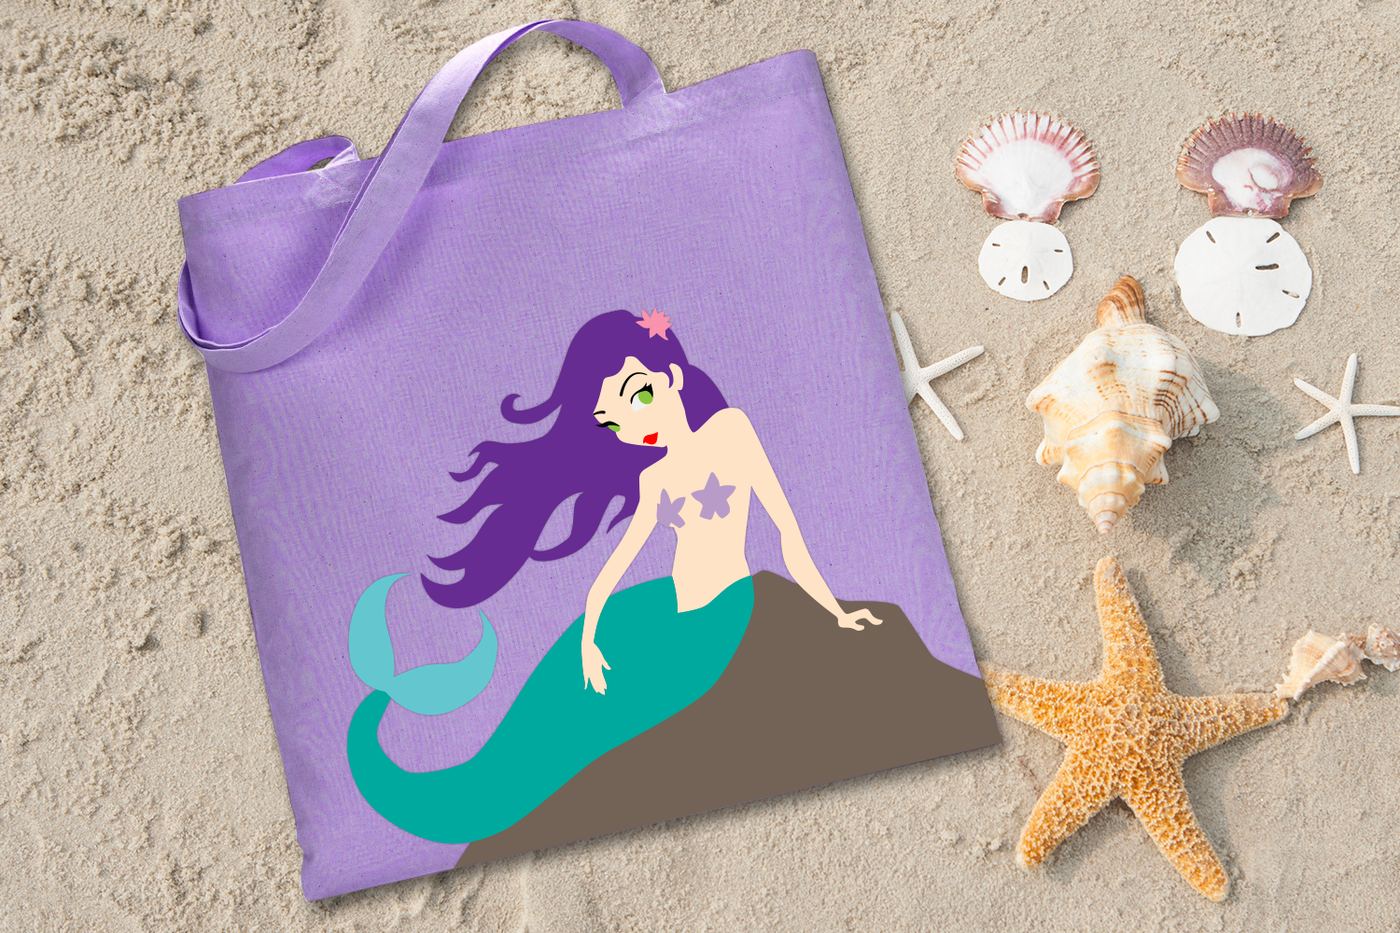 Tote bag with a mermaid design